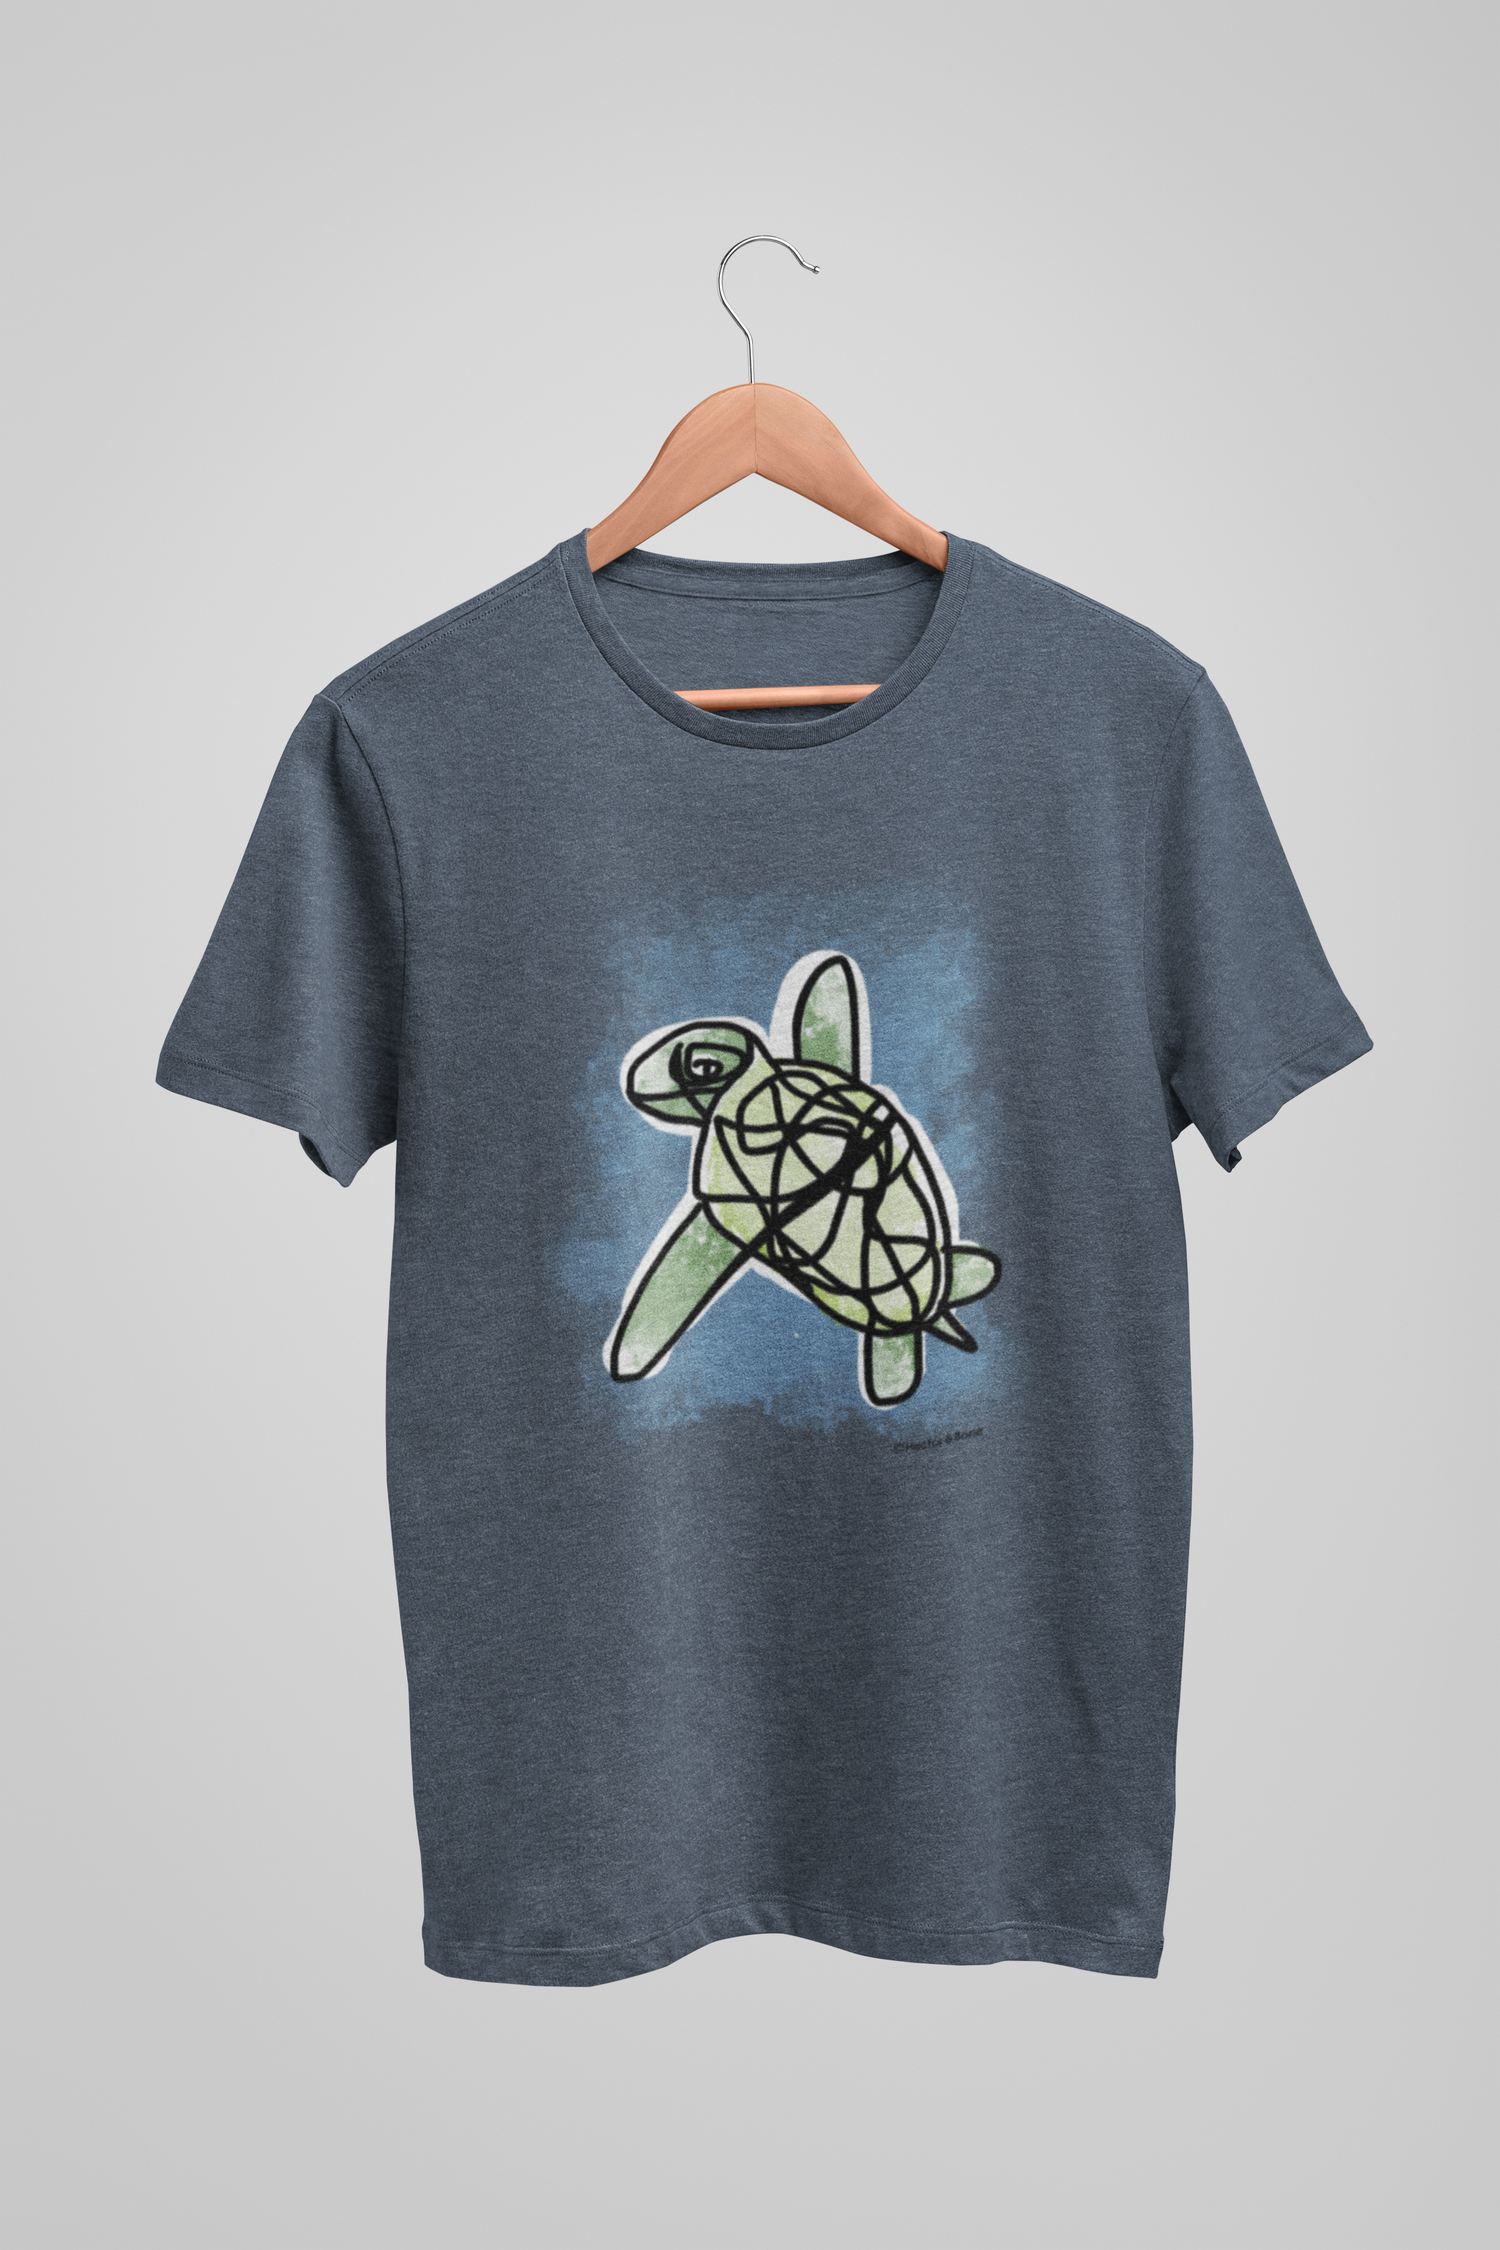 Sea Turtle T-shirt - Illustrated Green Sea Turtle T-shirts - Endangered species wildlife conservation - Quality heather blue vegan cotton turtle t-shirts by Hector and Bone